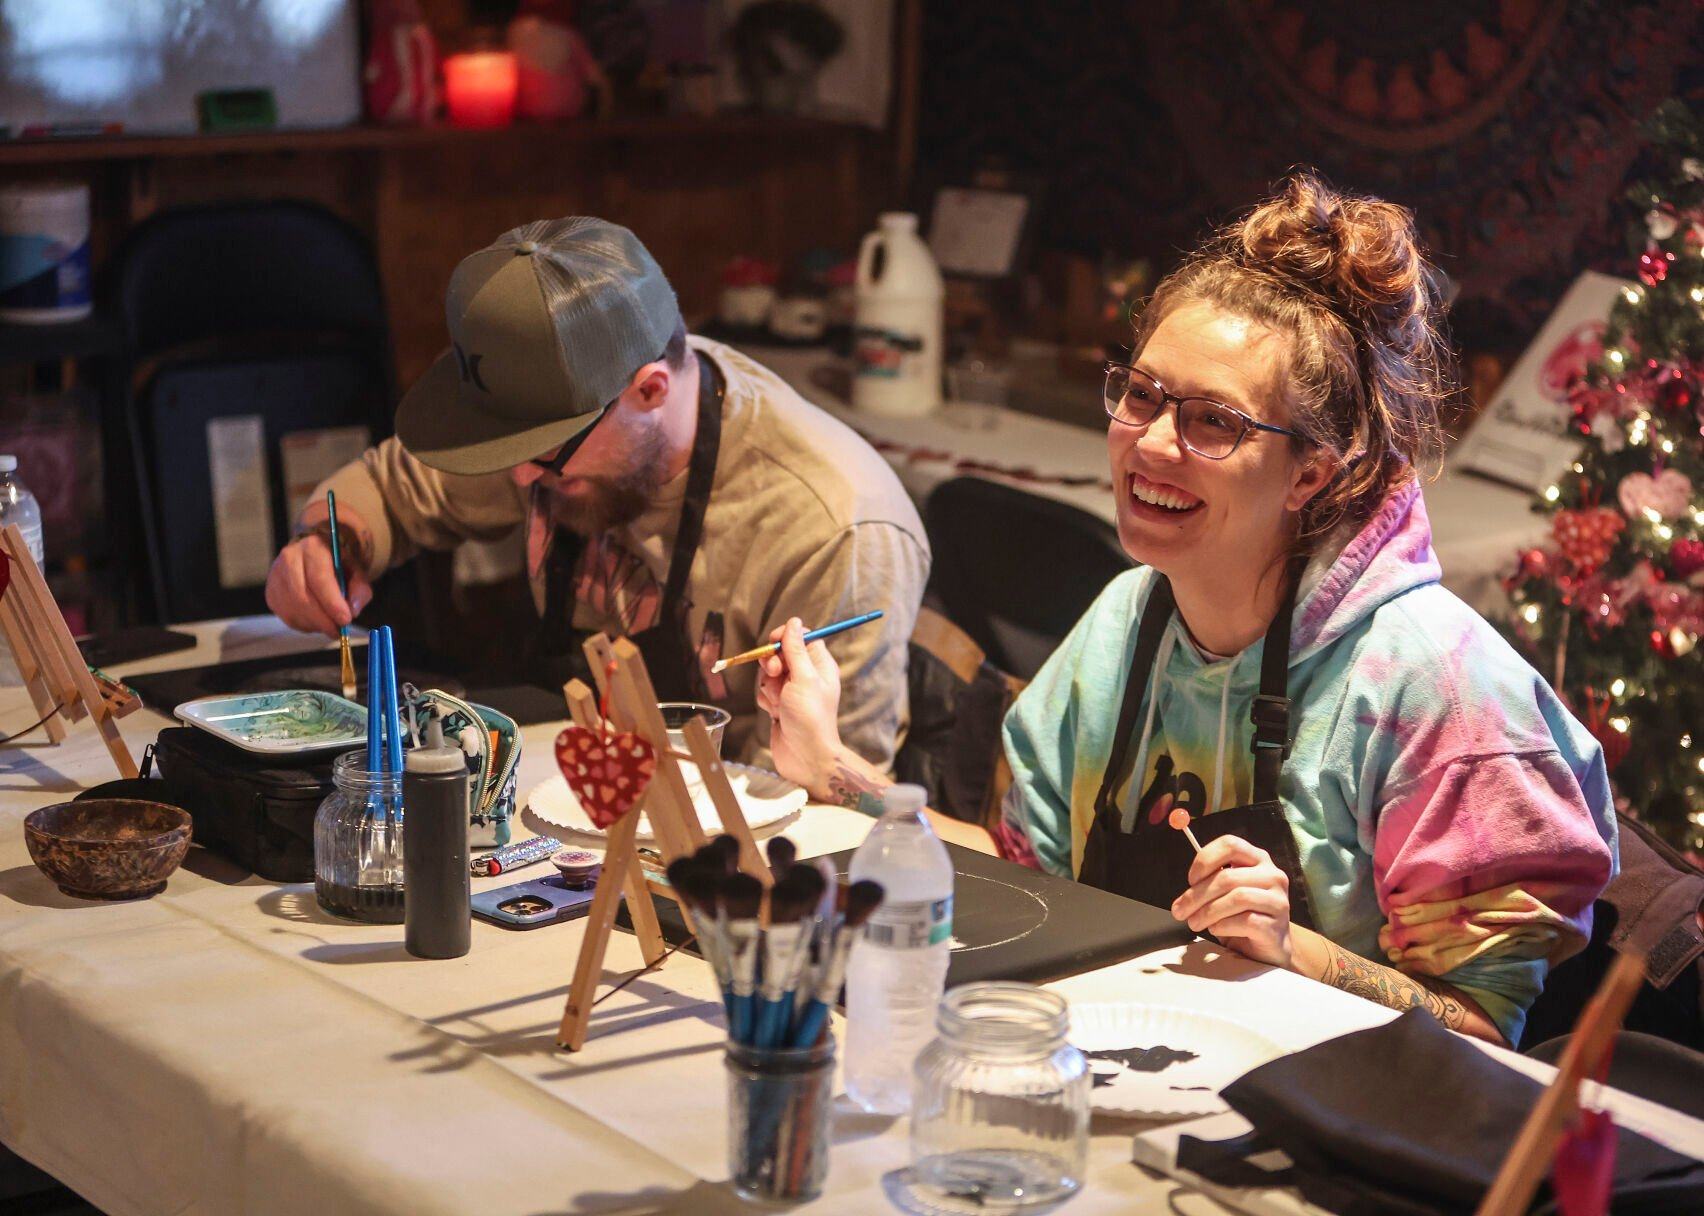 Eddie Klein (left) and Racheal Reynolds, both of Lancaster, Wis., take part in a painting class held at The Stoned Painter located in East Dubuque, Ill.    PHOTO CREDIT: Dave Kettering
Telegraph Herald